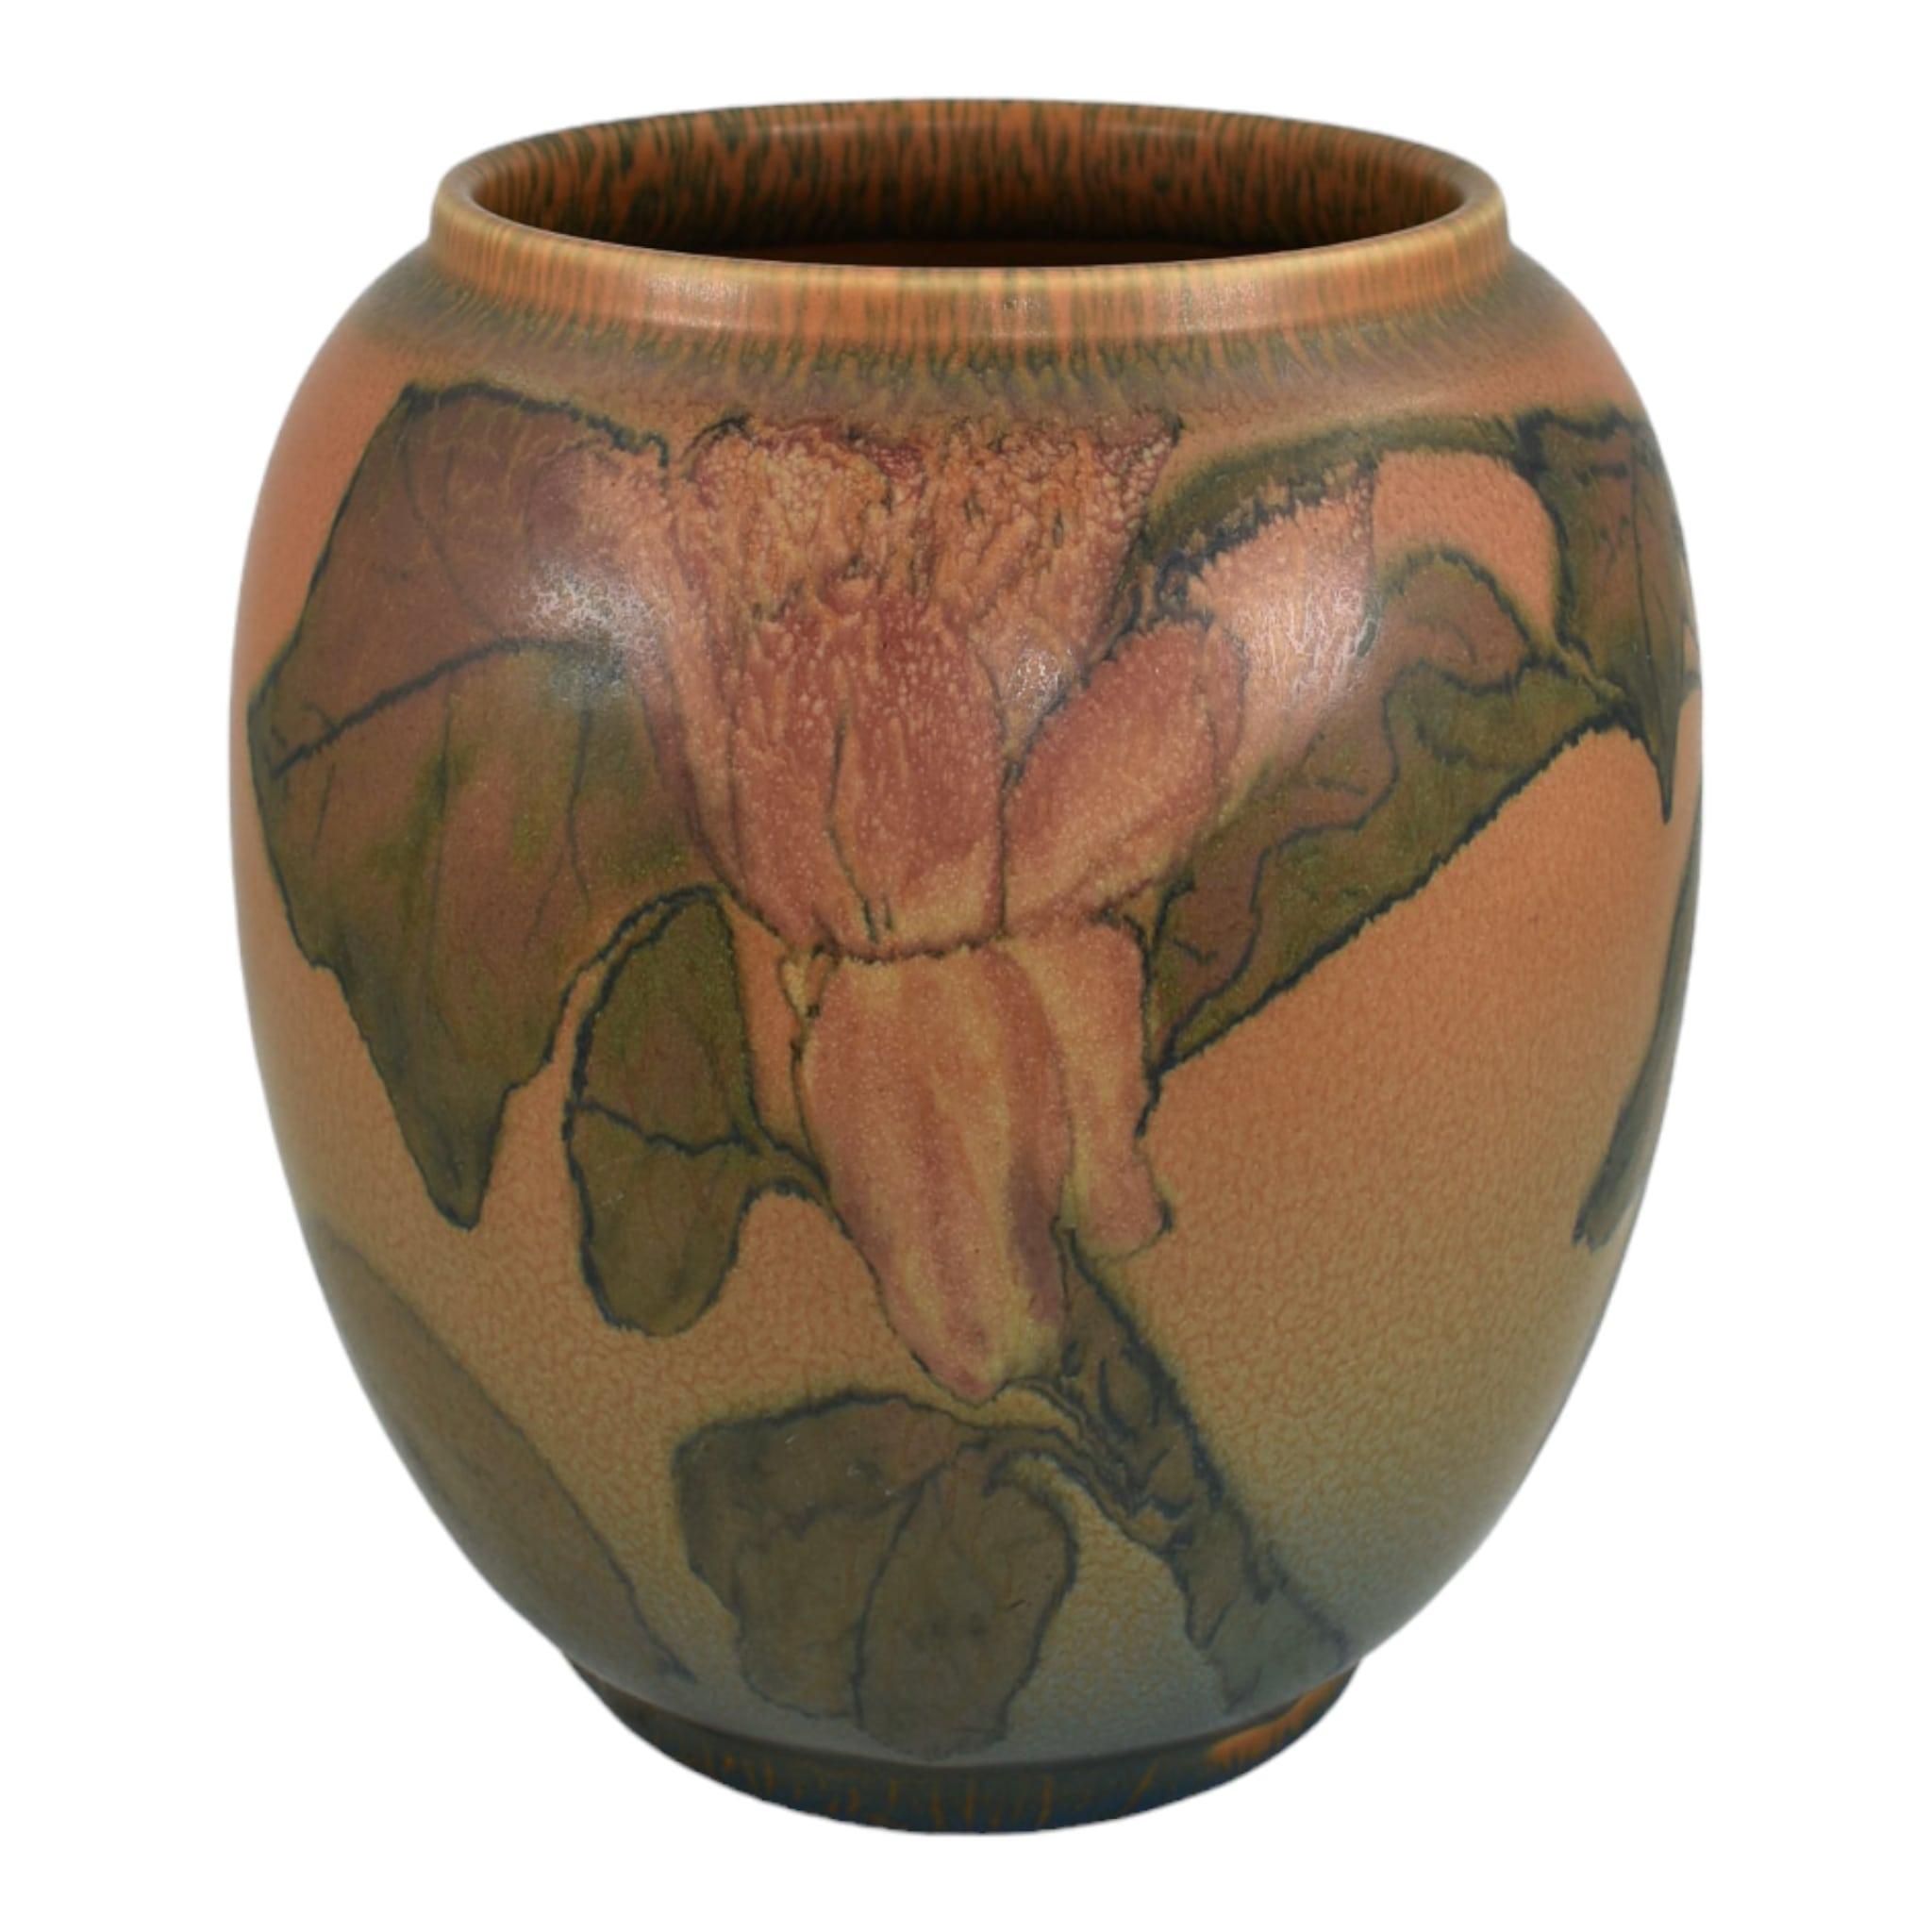 Rookwood 1924 Vintage Art Pottery Orange Vellum Ceramic Vase 2245 (Lincoln) In Good Condition For Sale In East Peoria, IL